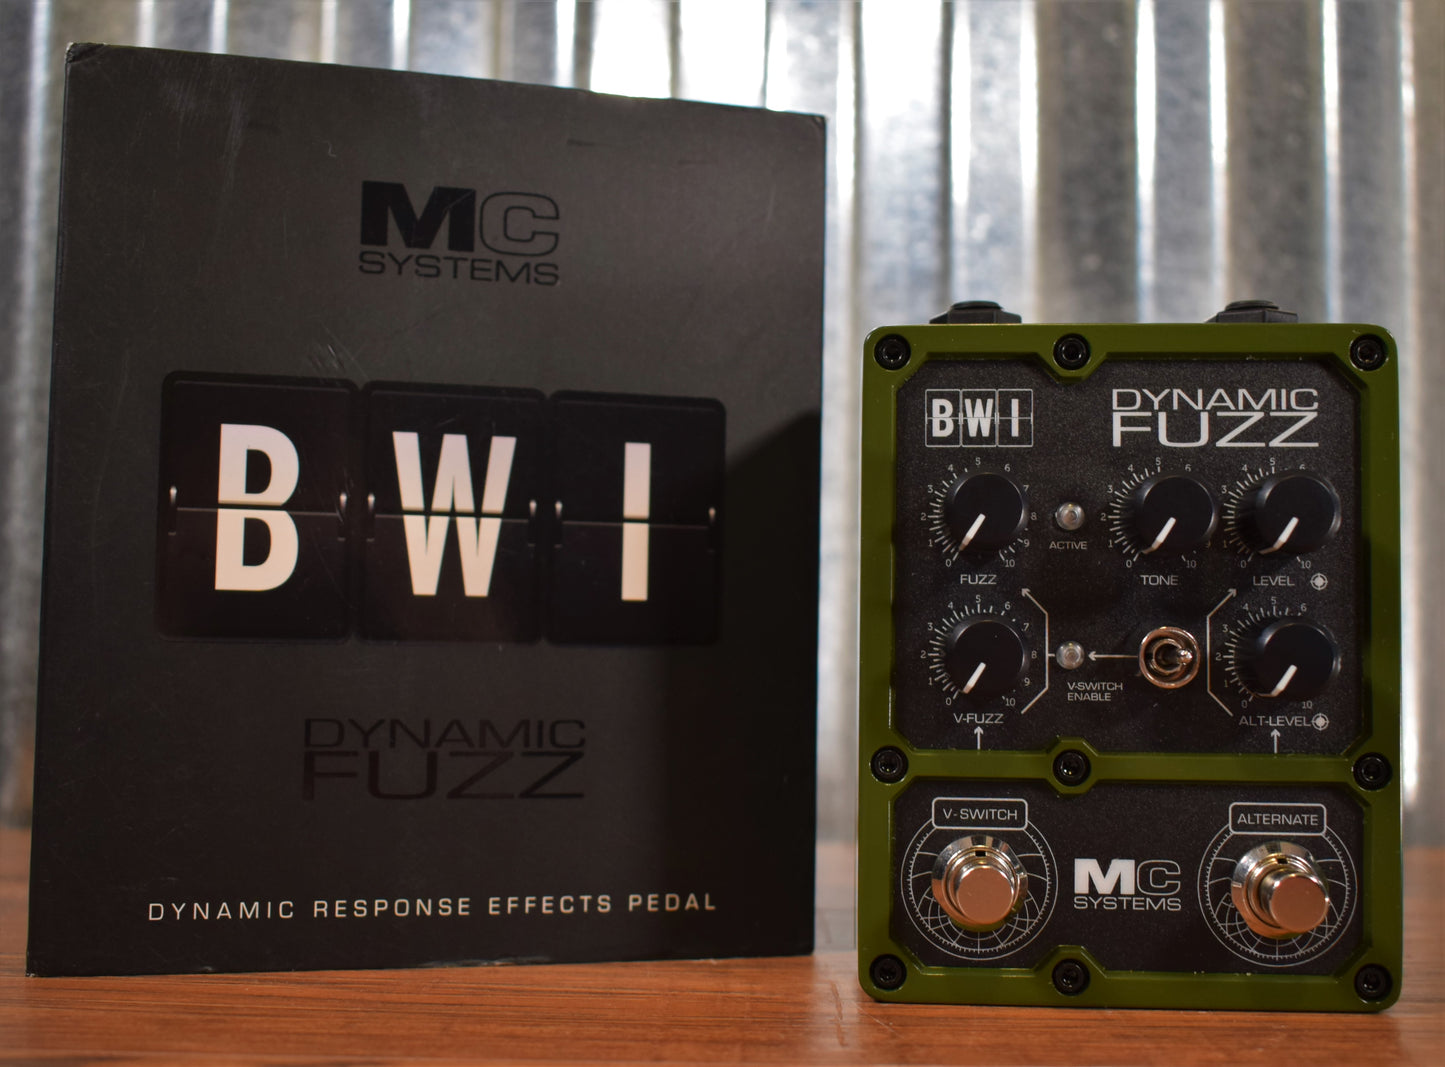 MC Systems Apollo BWI Dynamic Fuzz Guitar Effect Pedal Used